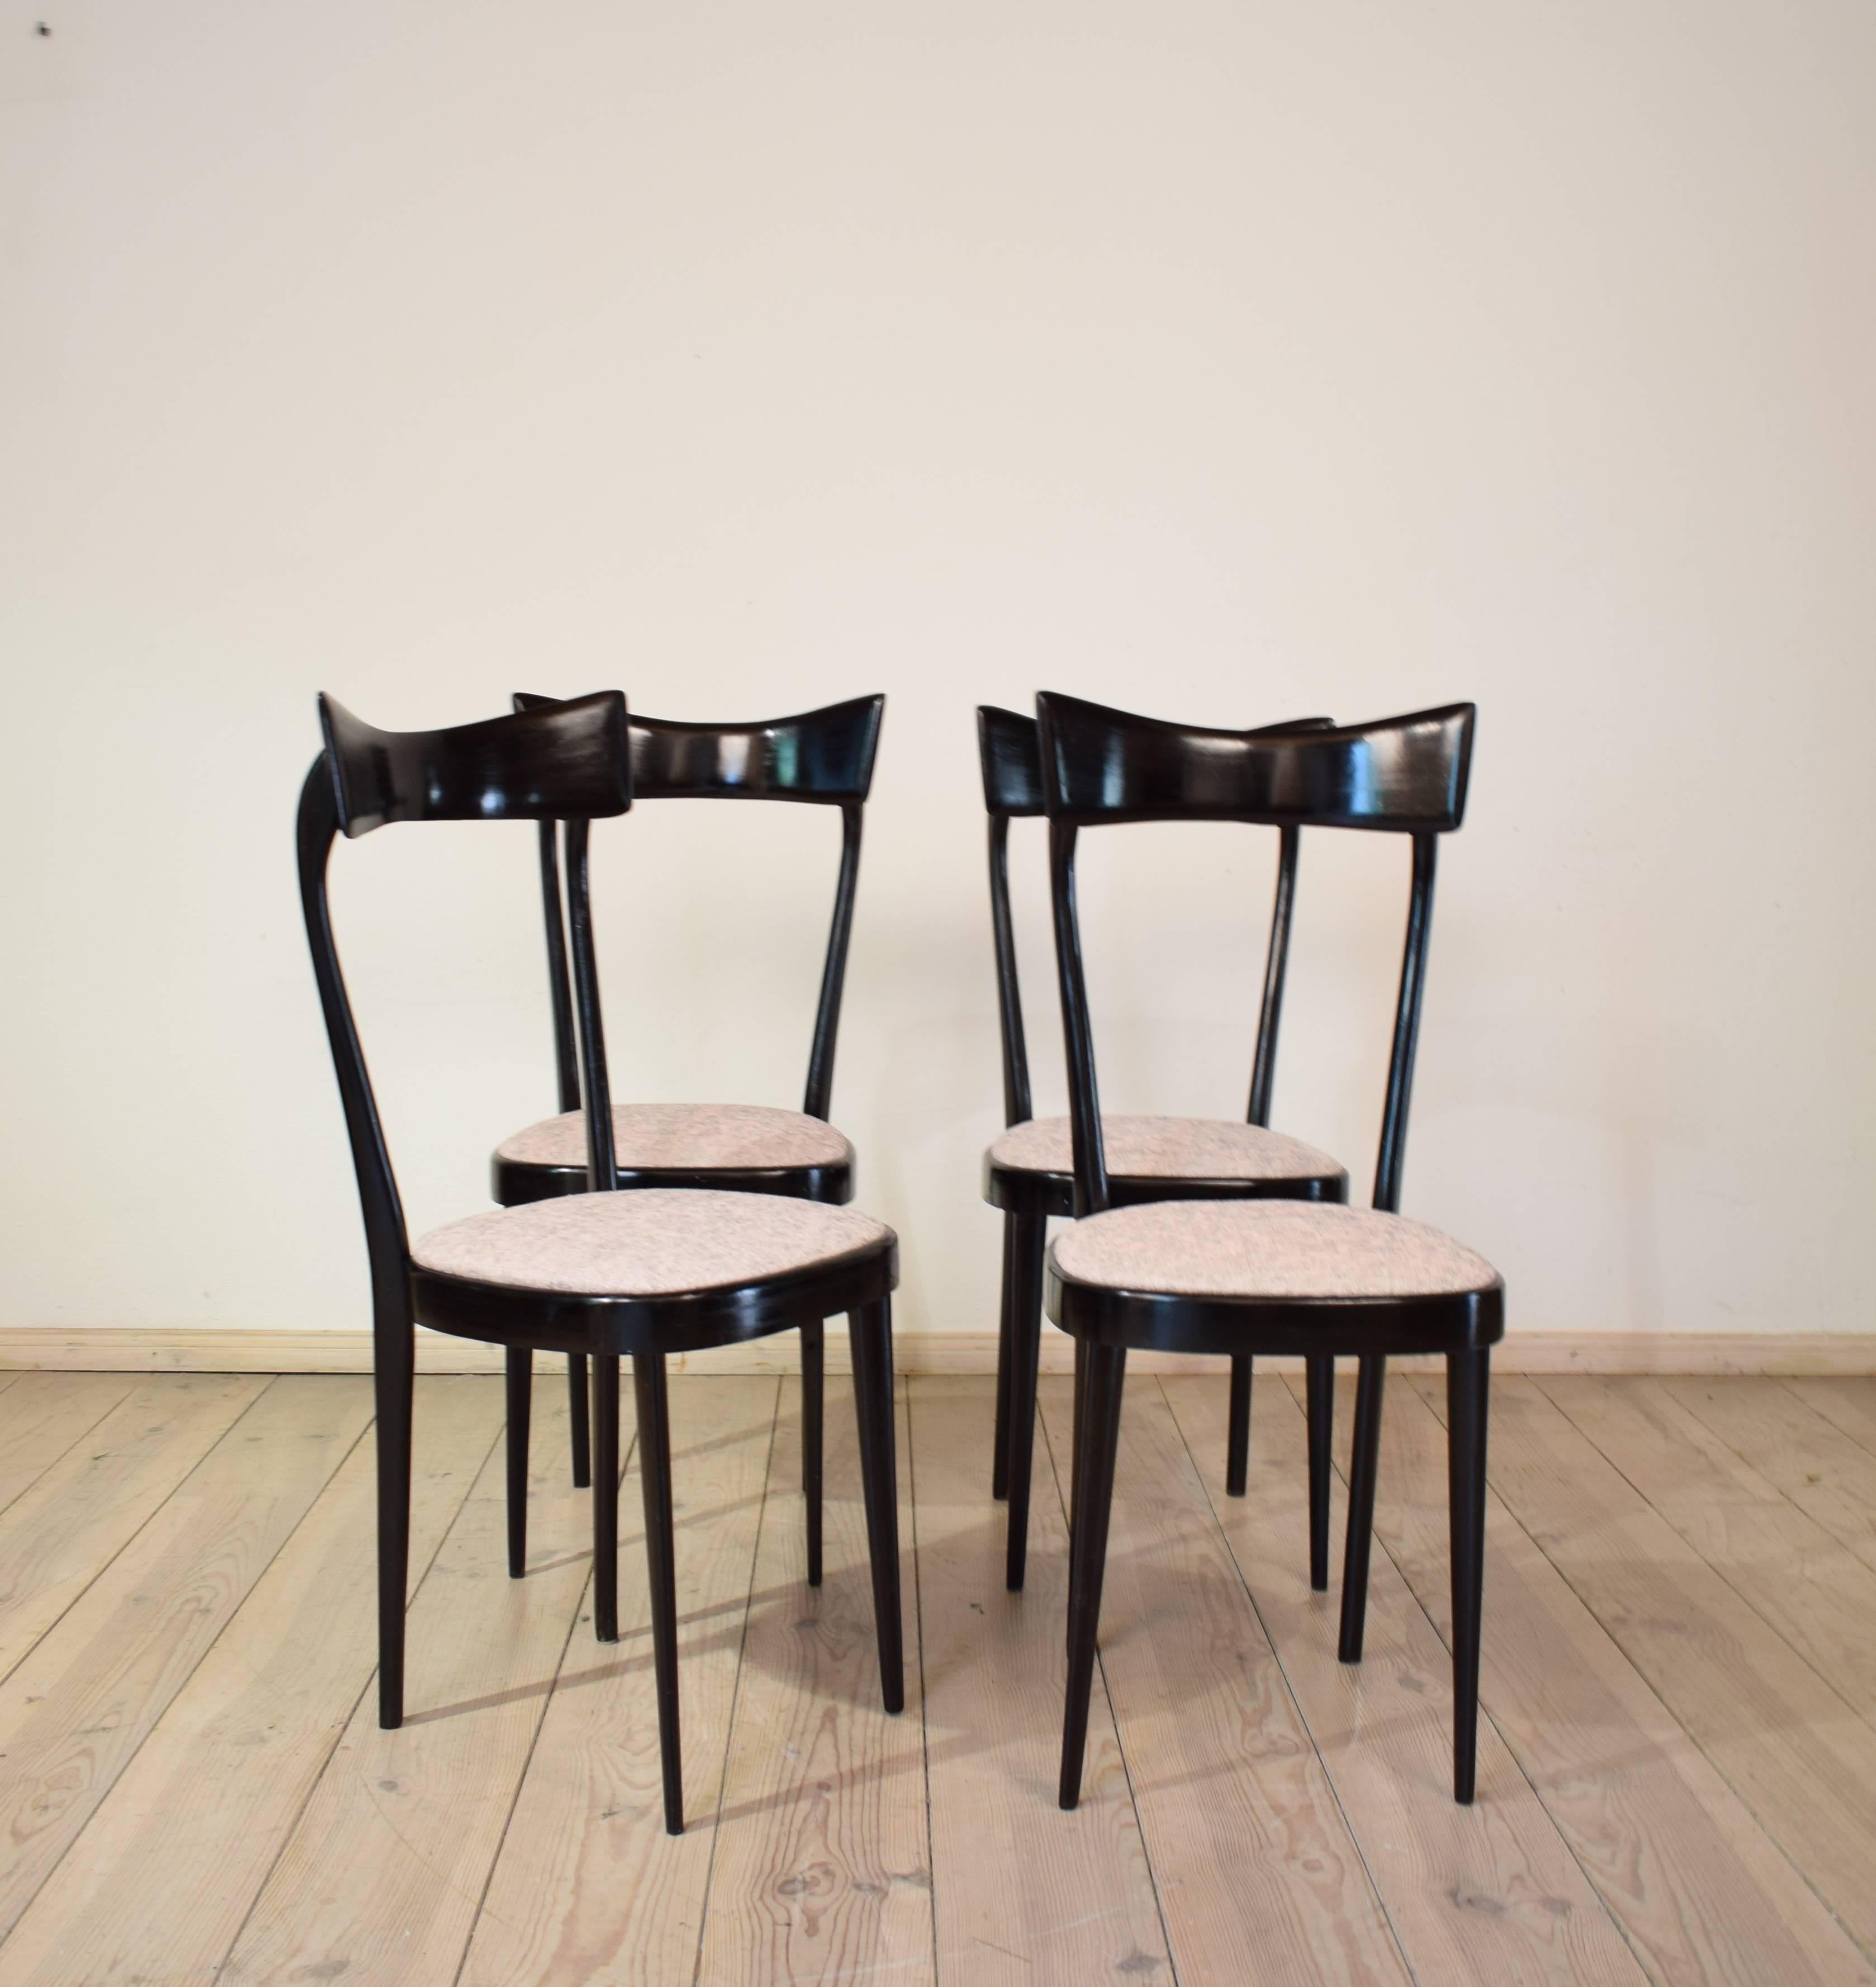 This Set of four midcentury dining chairs where made in Italy in the 1950s.
They are made in the manner of Ico Parisi which was a designer and architect.
The chairs have a very unique shape.
They and are made out of ebonized beech and the